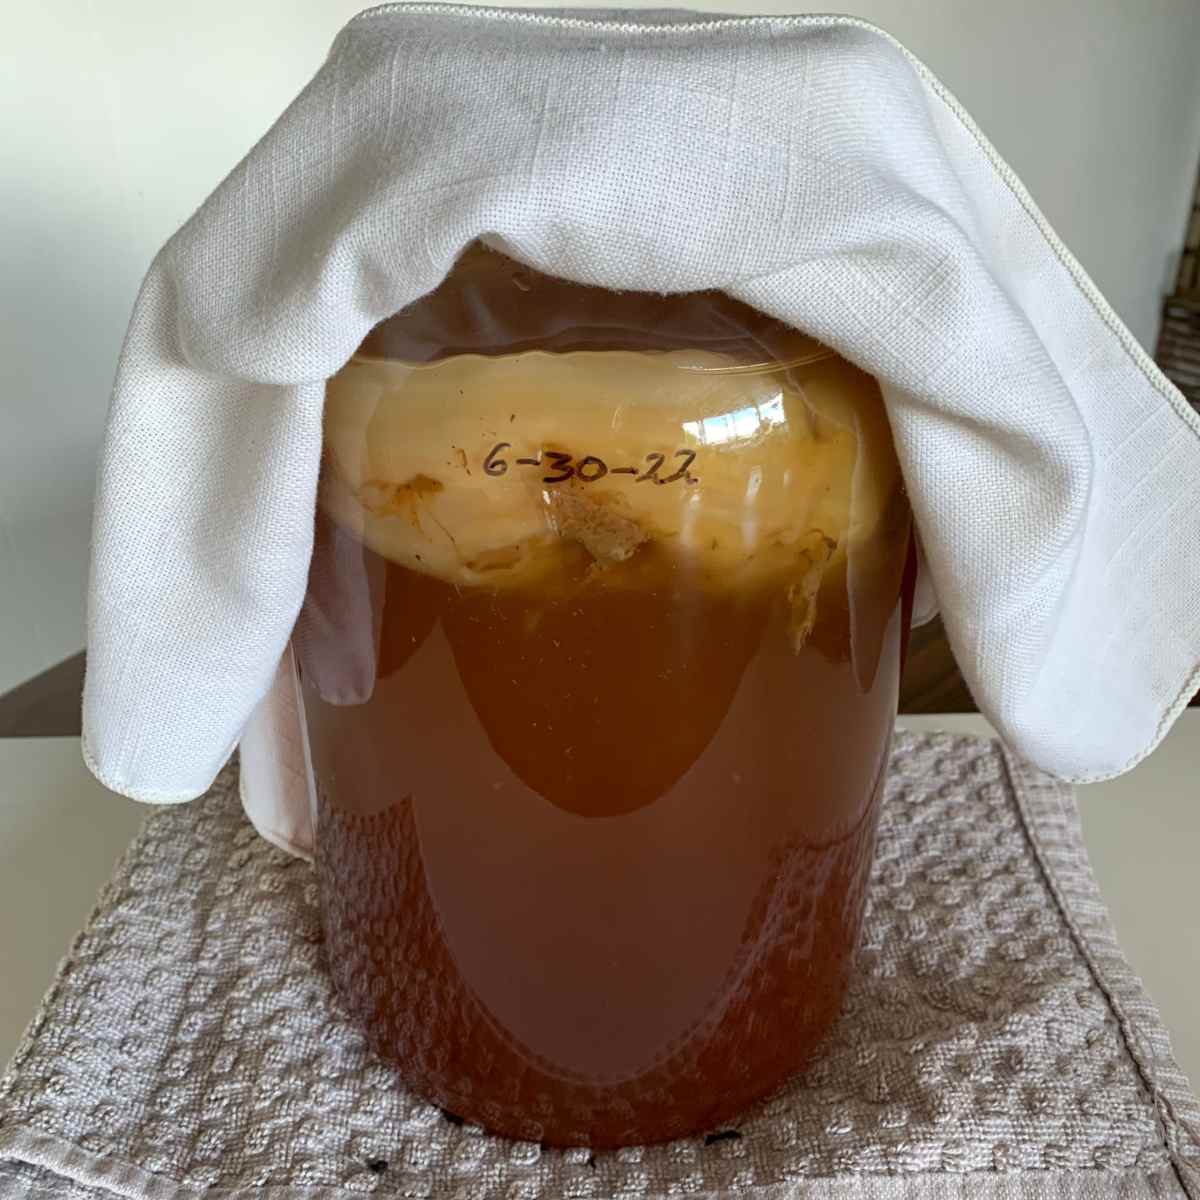 homemade kombucha and SCOBY in a one gallon glass jar.